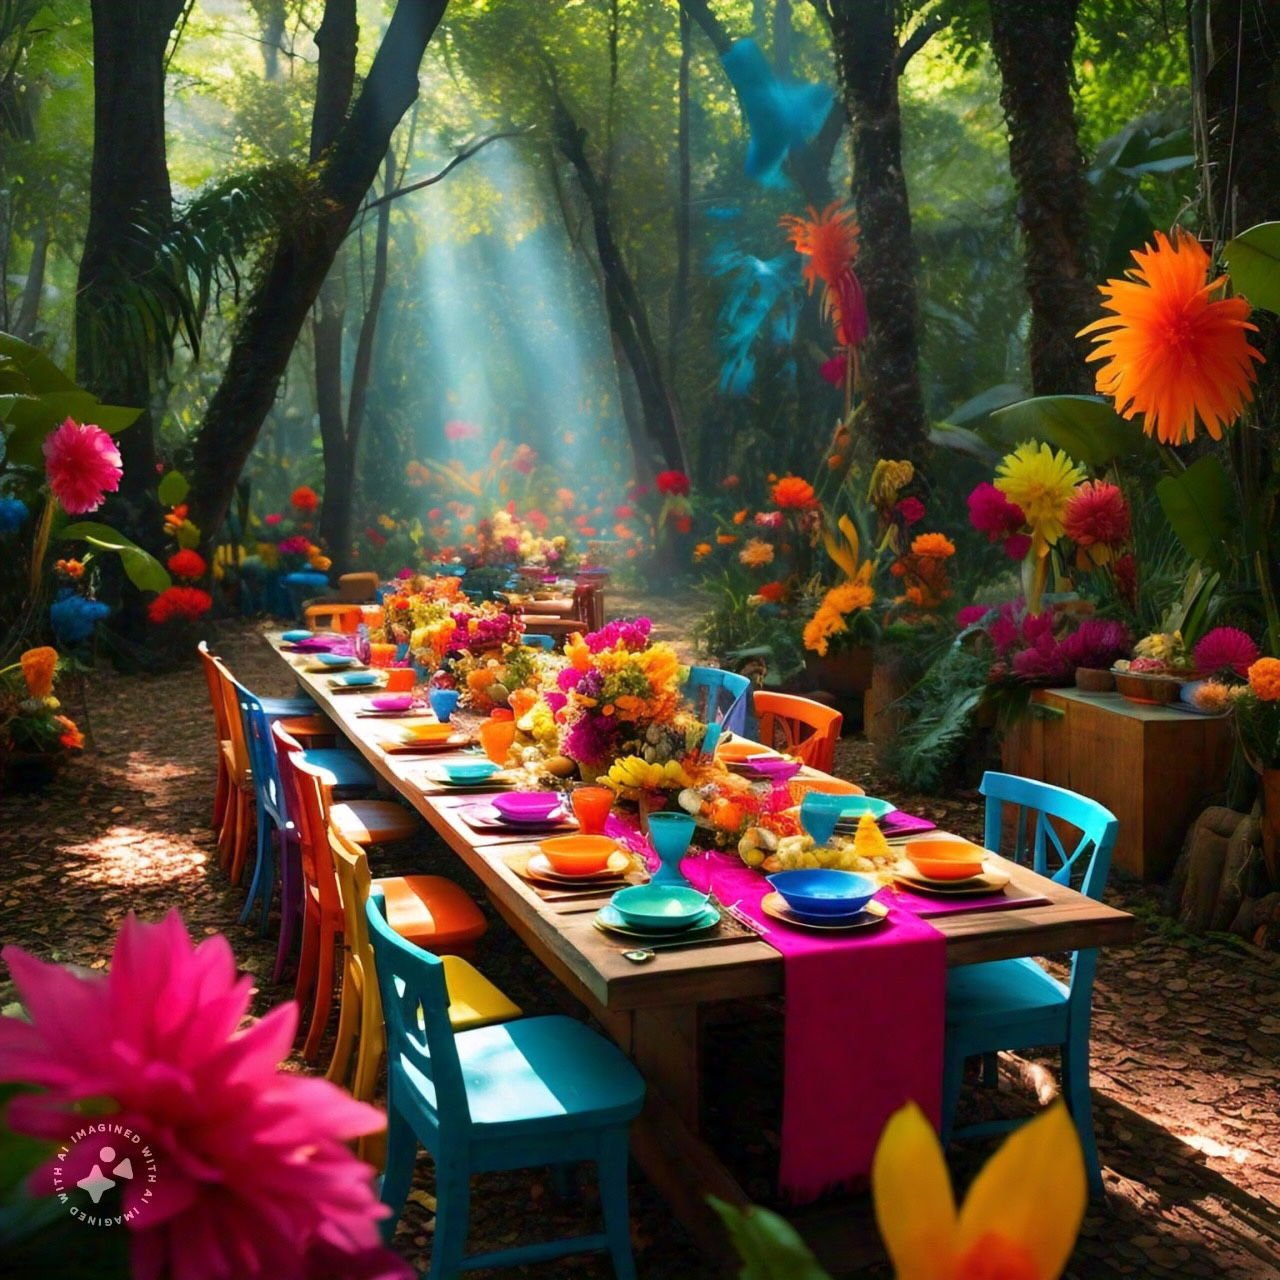 Look at this dreamy colorful dining extravaganza! What do you think they will be serving?